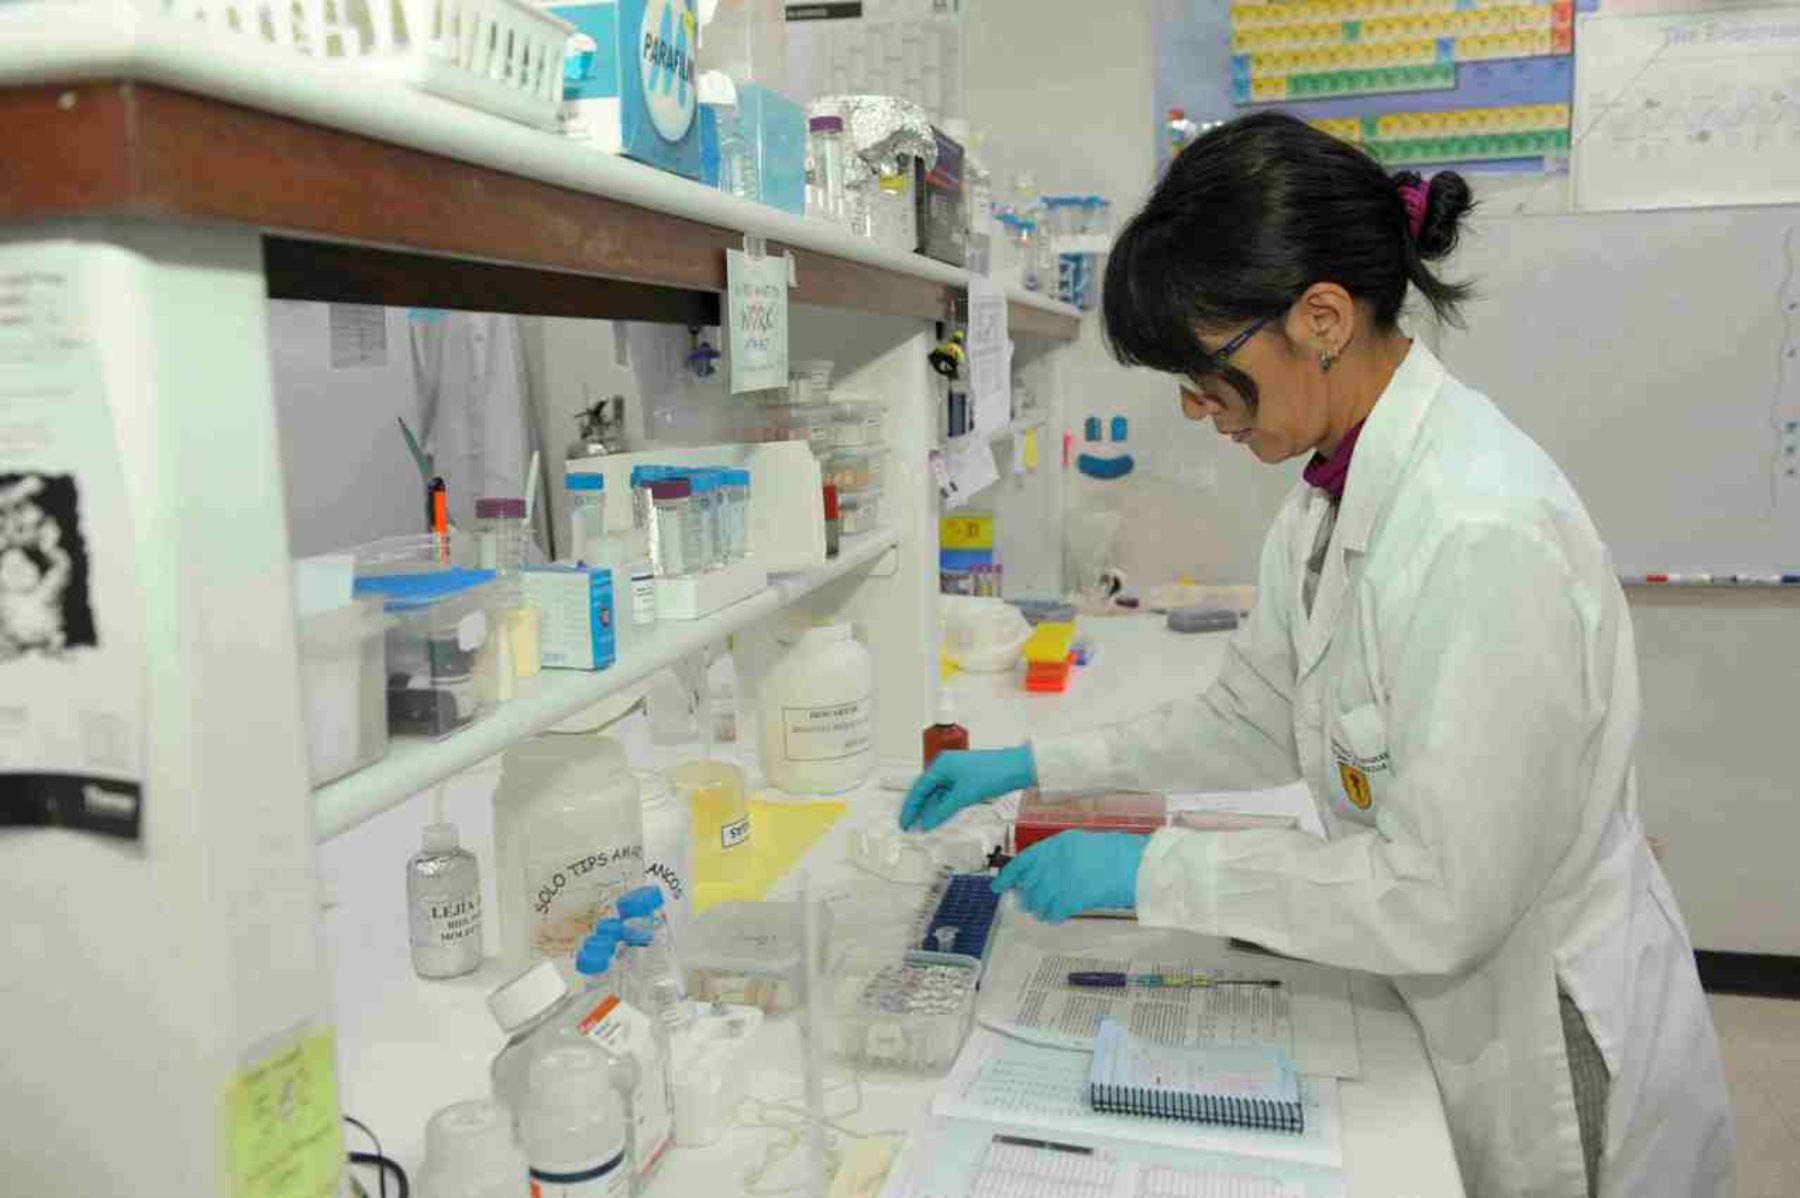 “Peru con Ciencia” started its activities during 2019 in Trujillo.  (Andean)